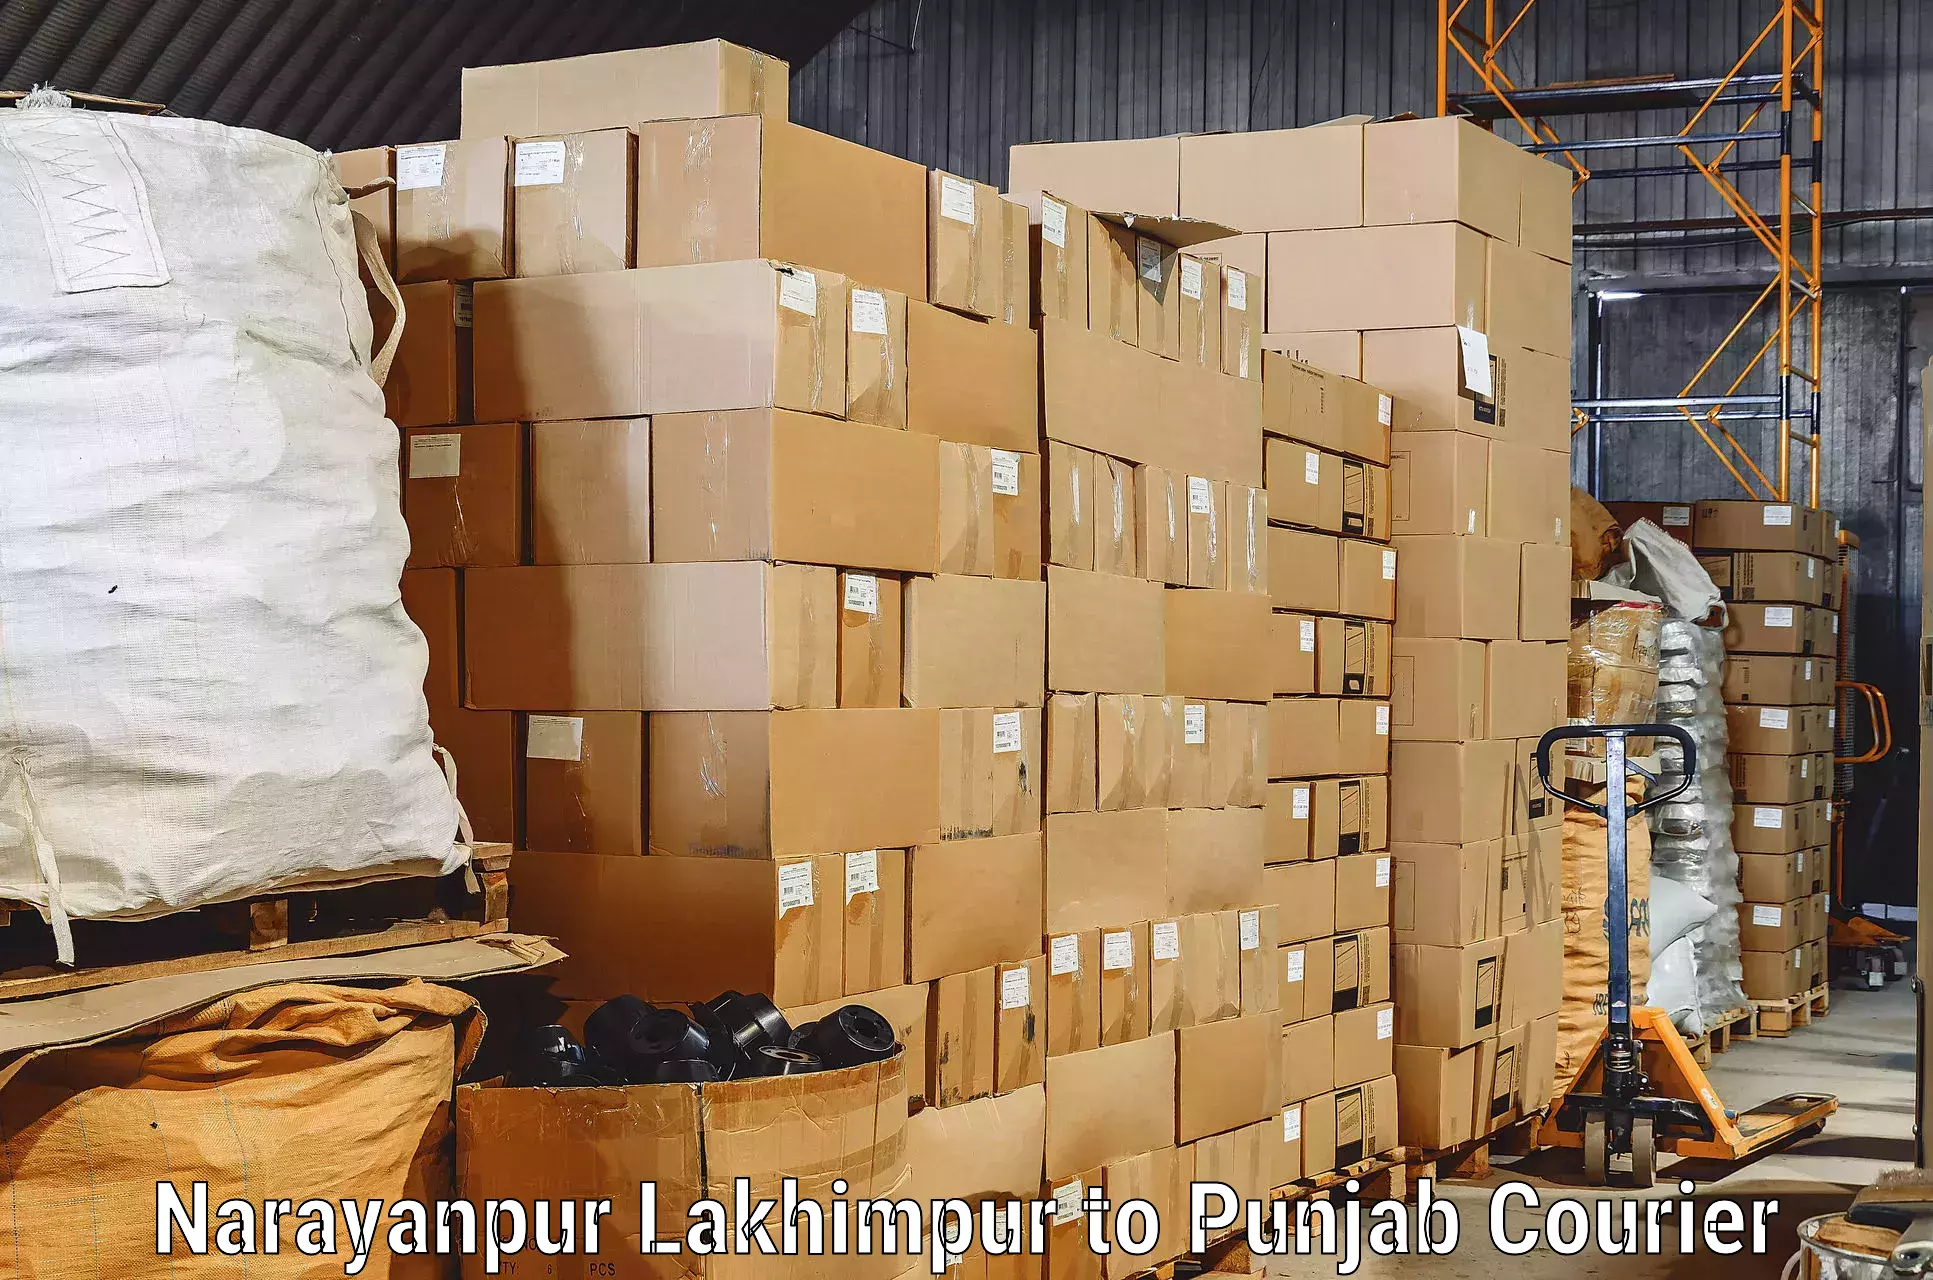 Trusted moving company Narayanpur Lakhimpur to Mohali